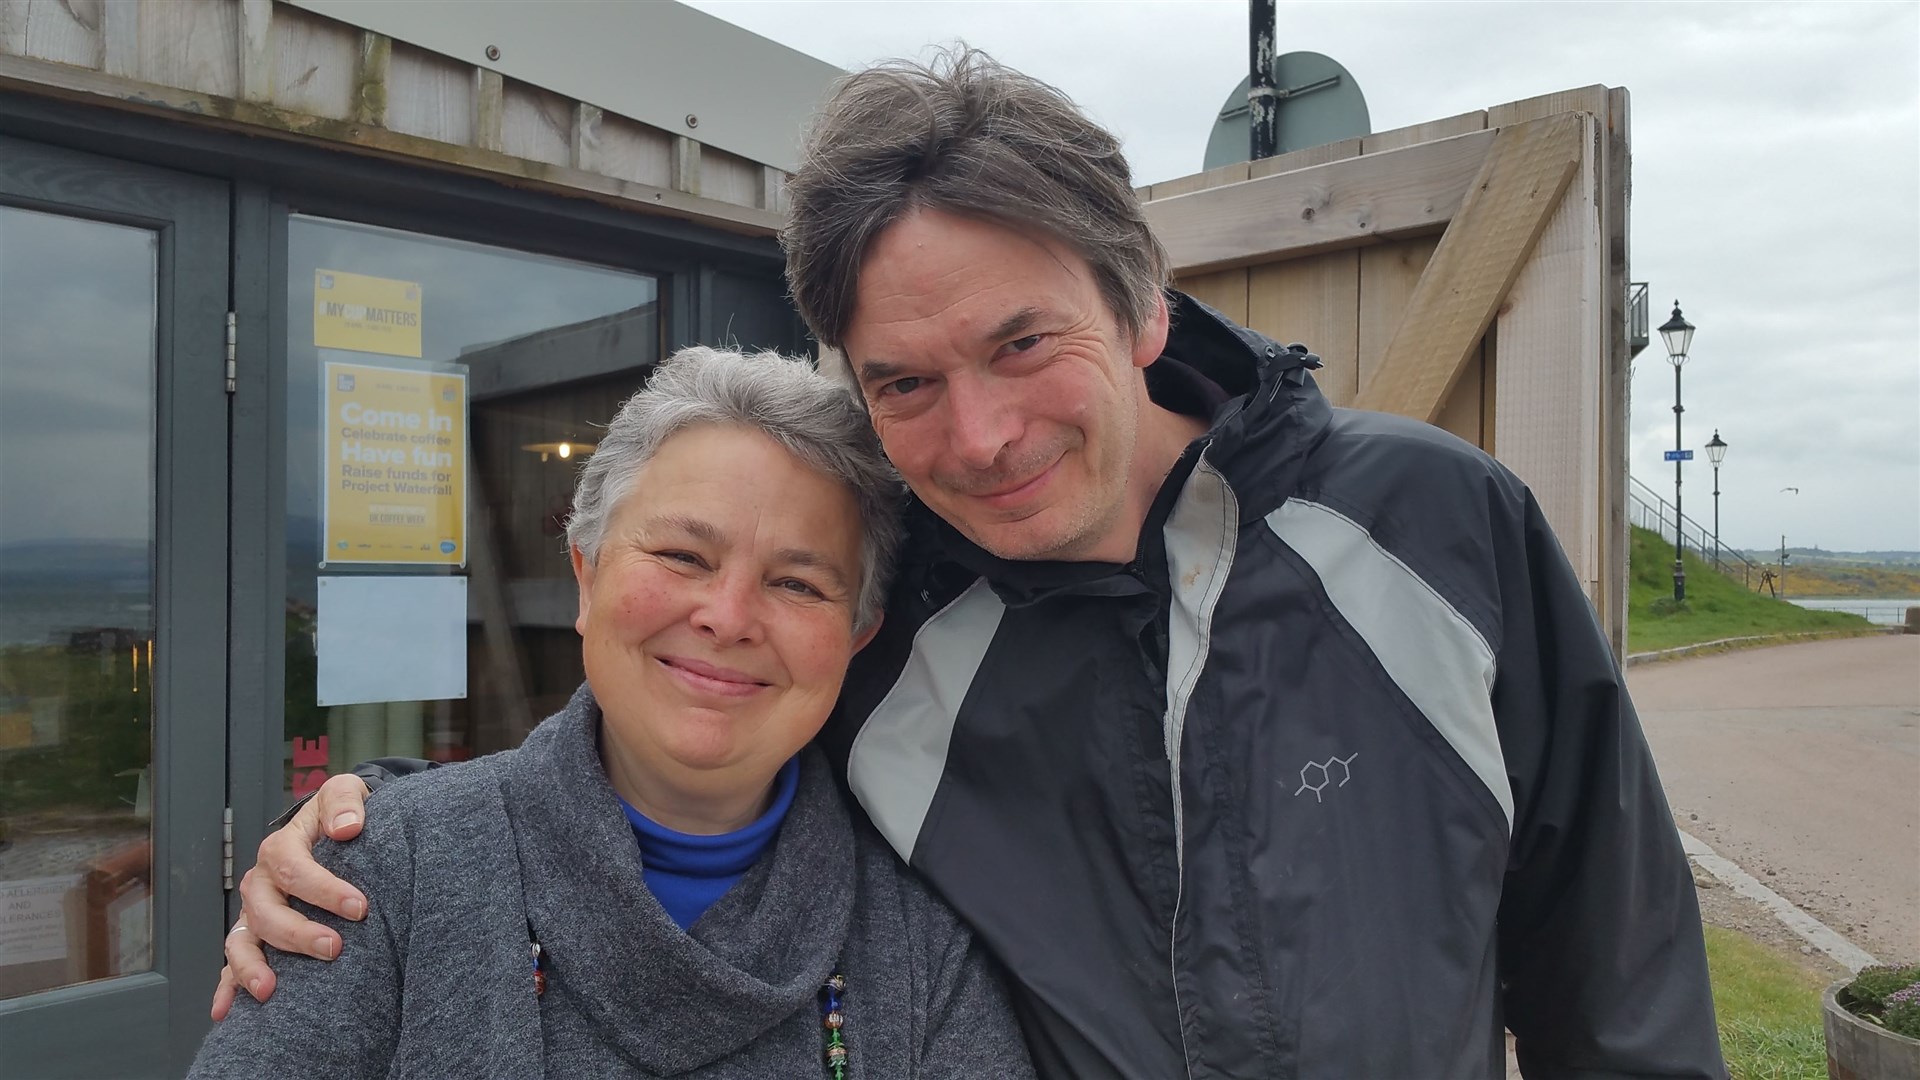 Vee Walker with Ian Rankin: All is forgiven after the 'shooting' incident!